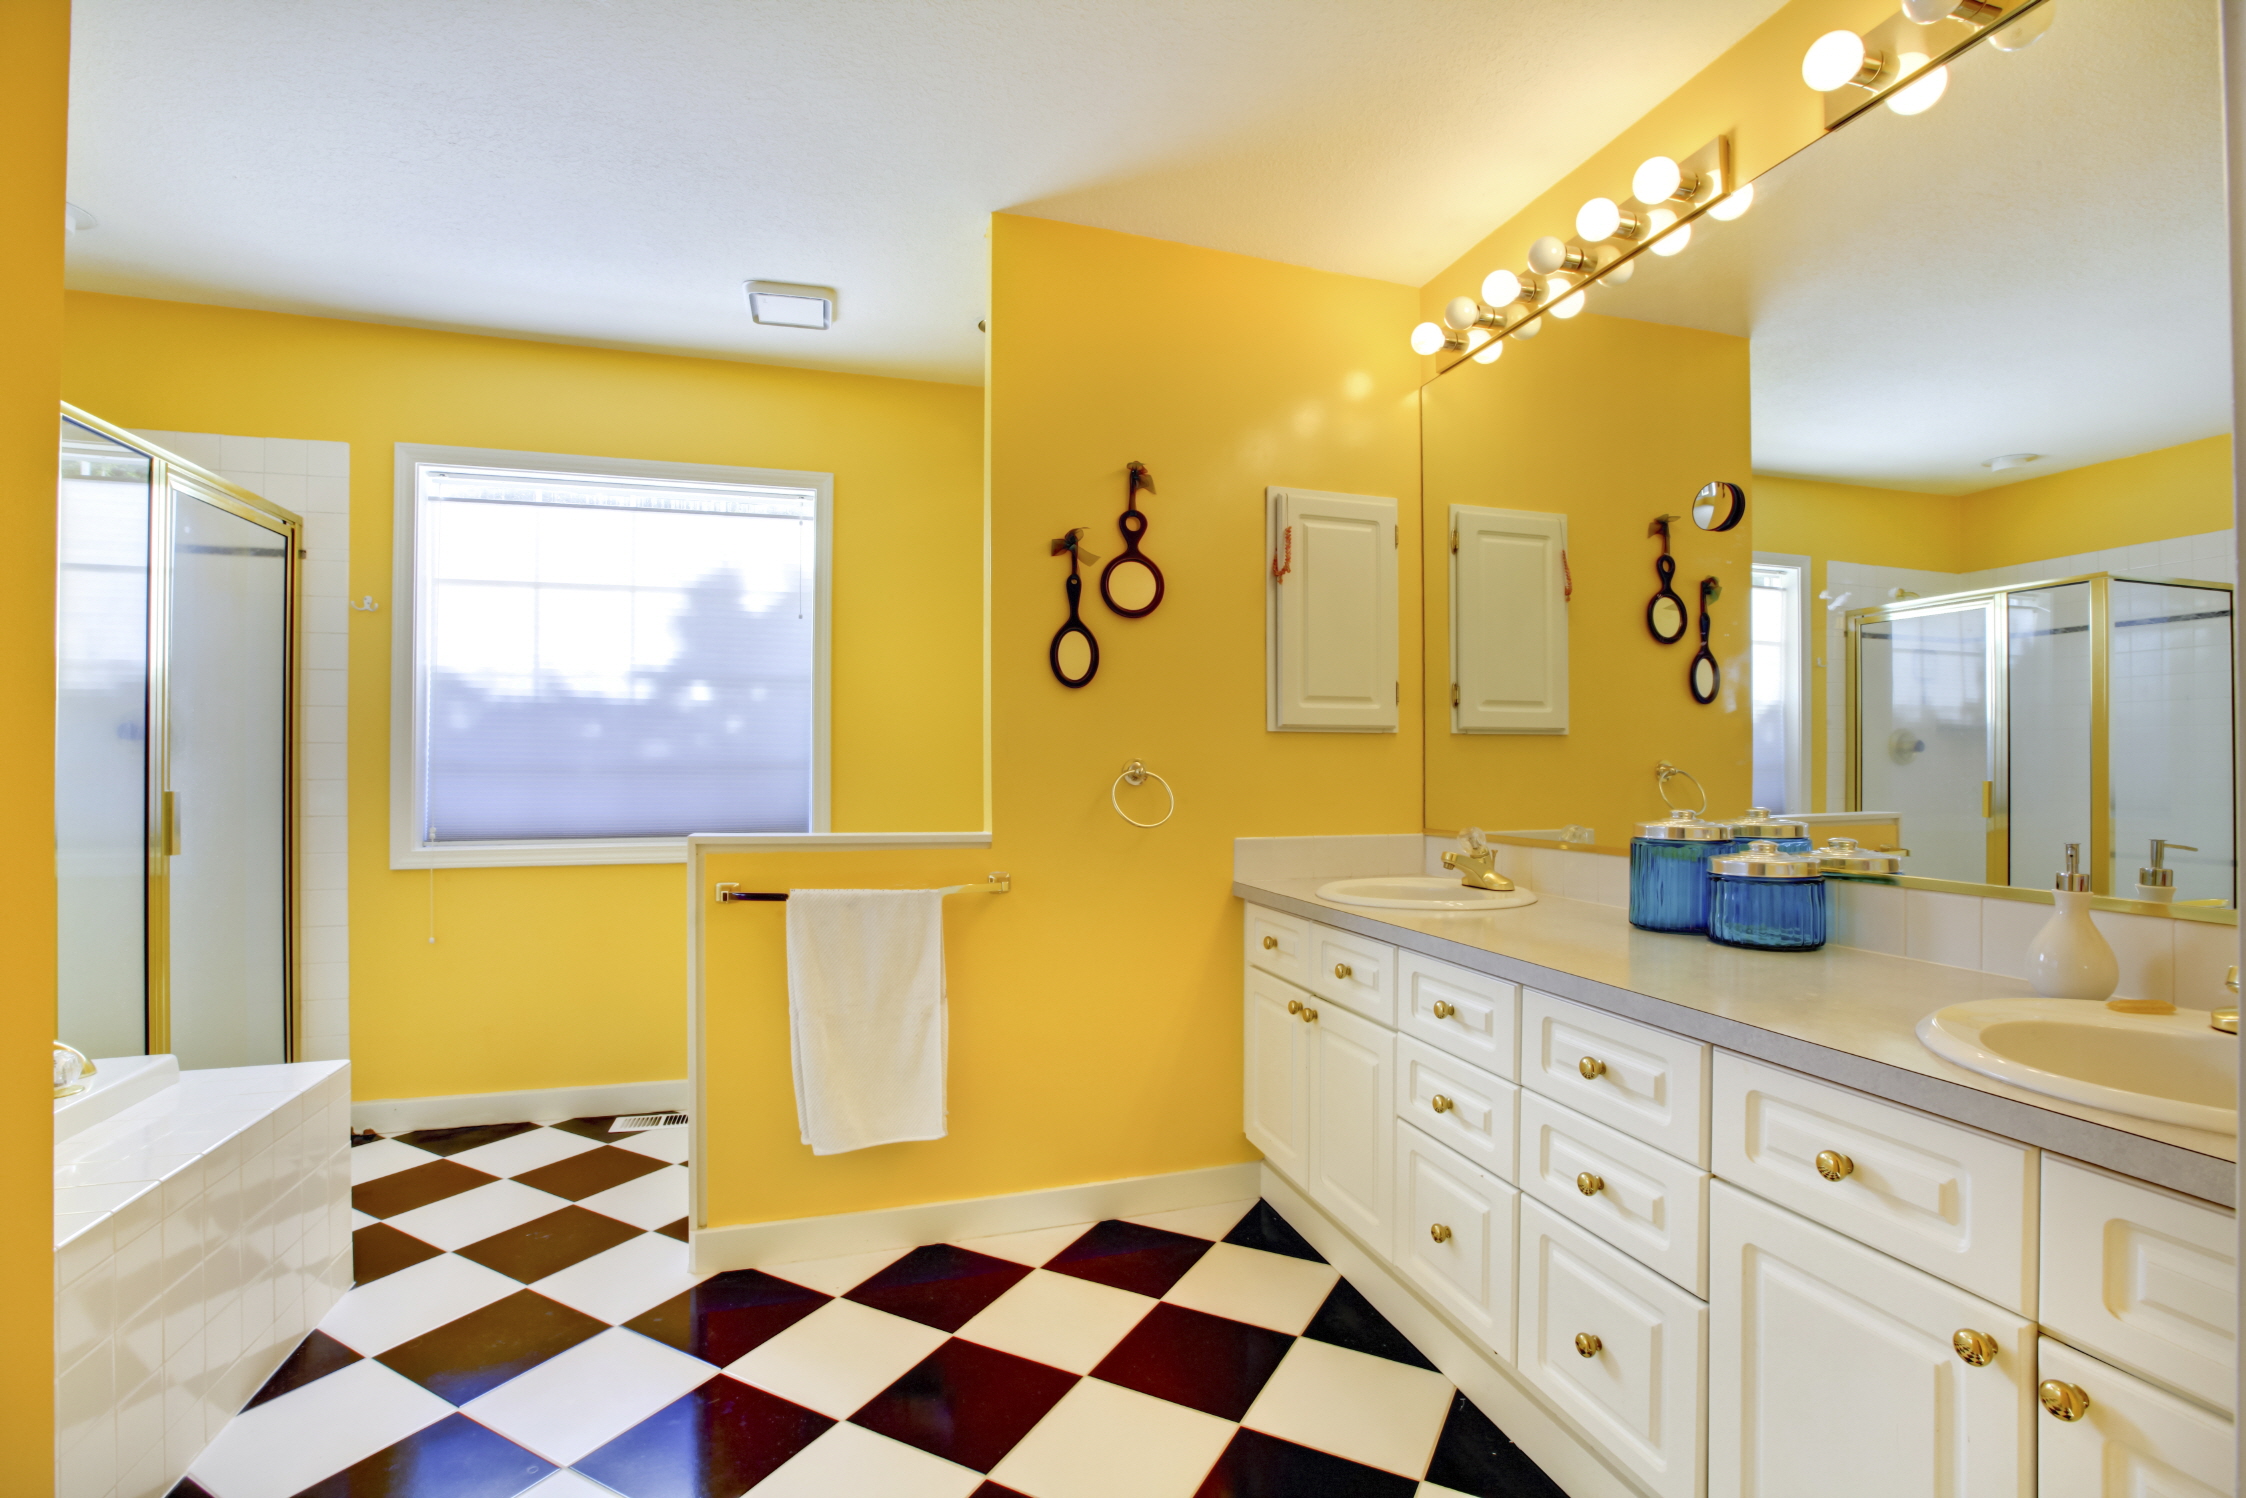 Add personality to your bathroom with vibrant paint colors like teal or mustard yellow for a pop of color, and experiment with bold patterns for drama.